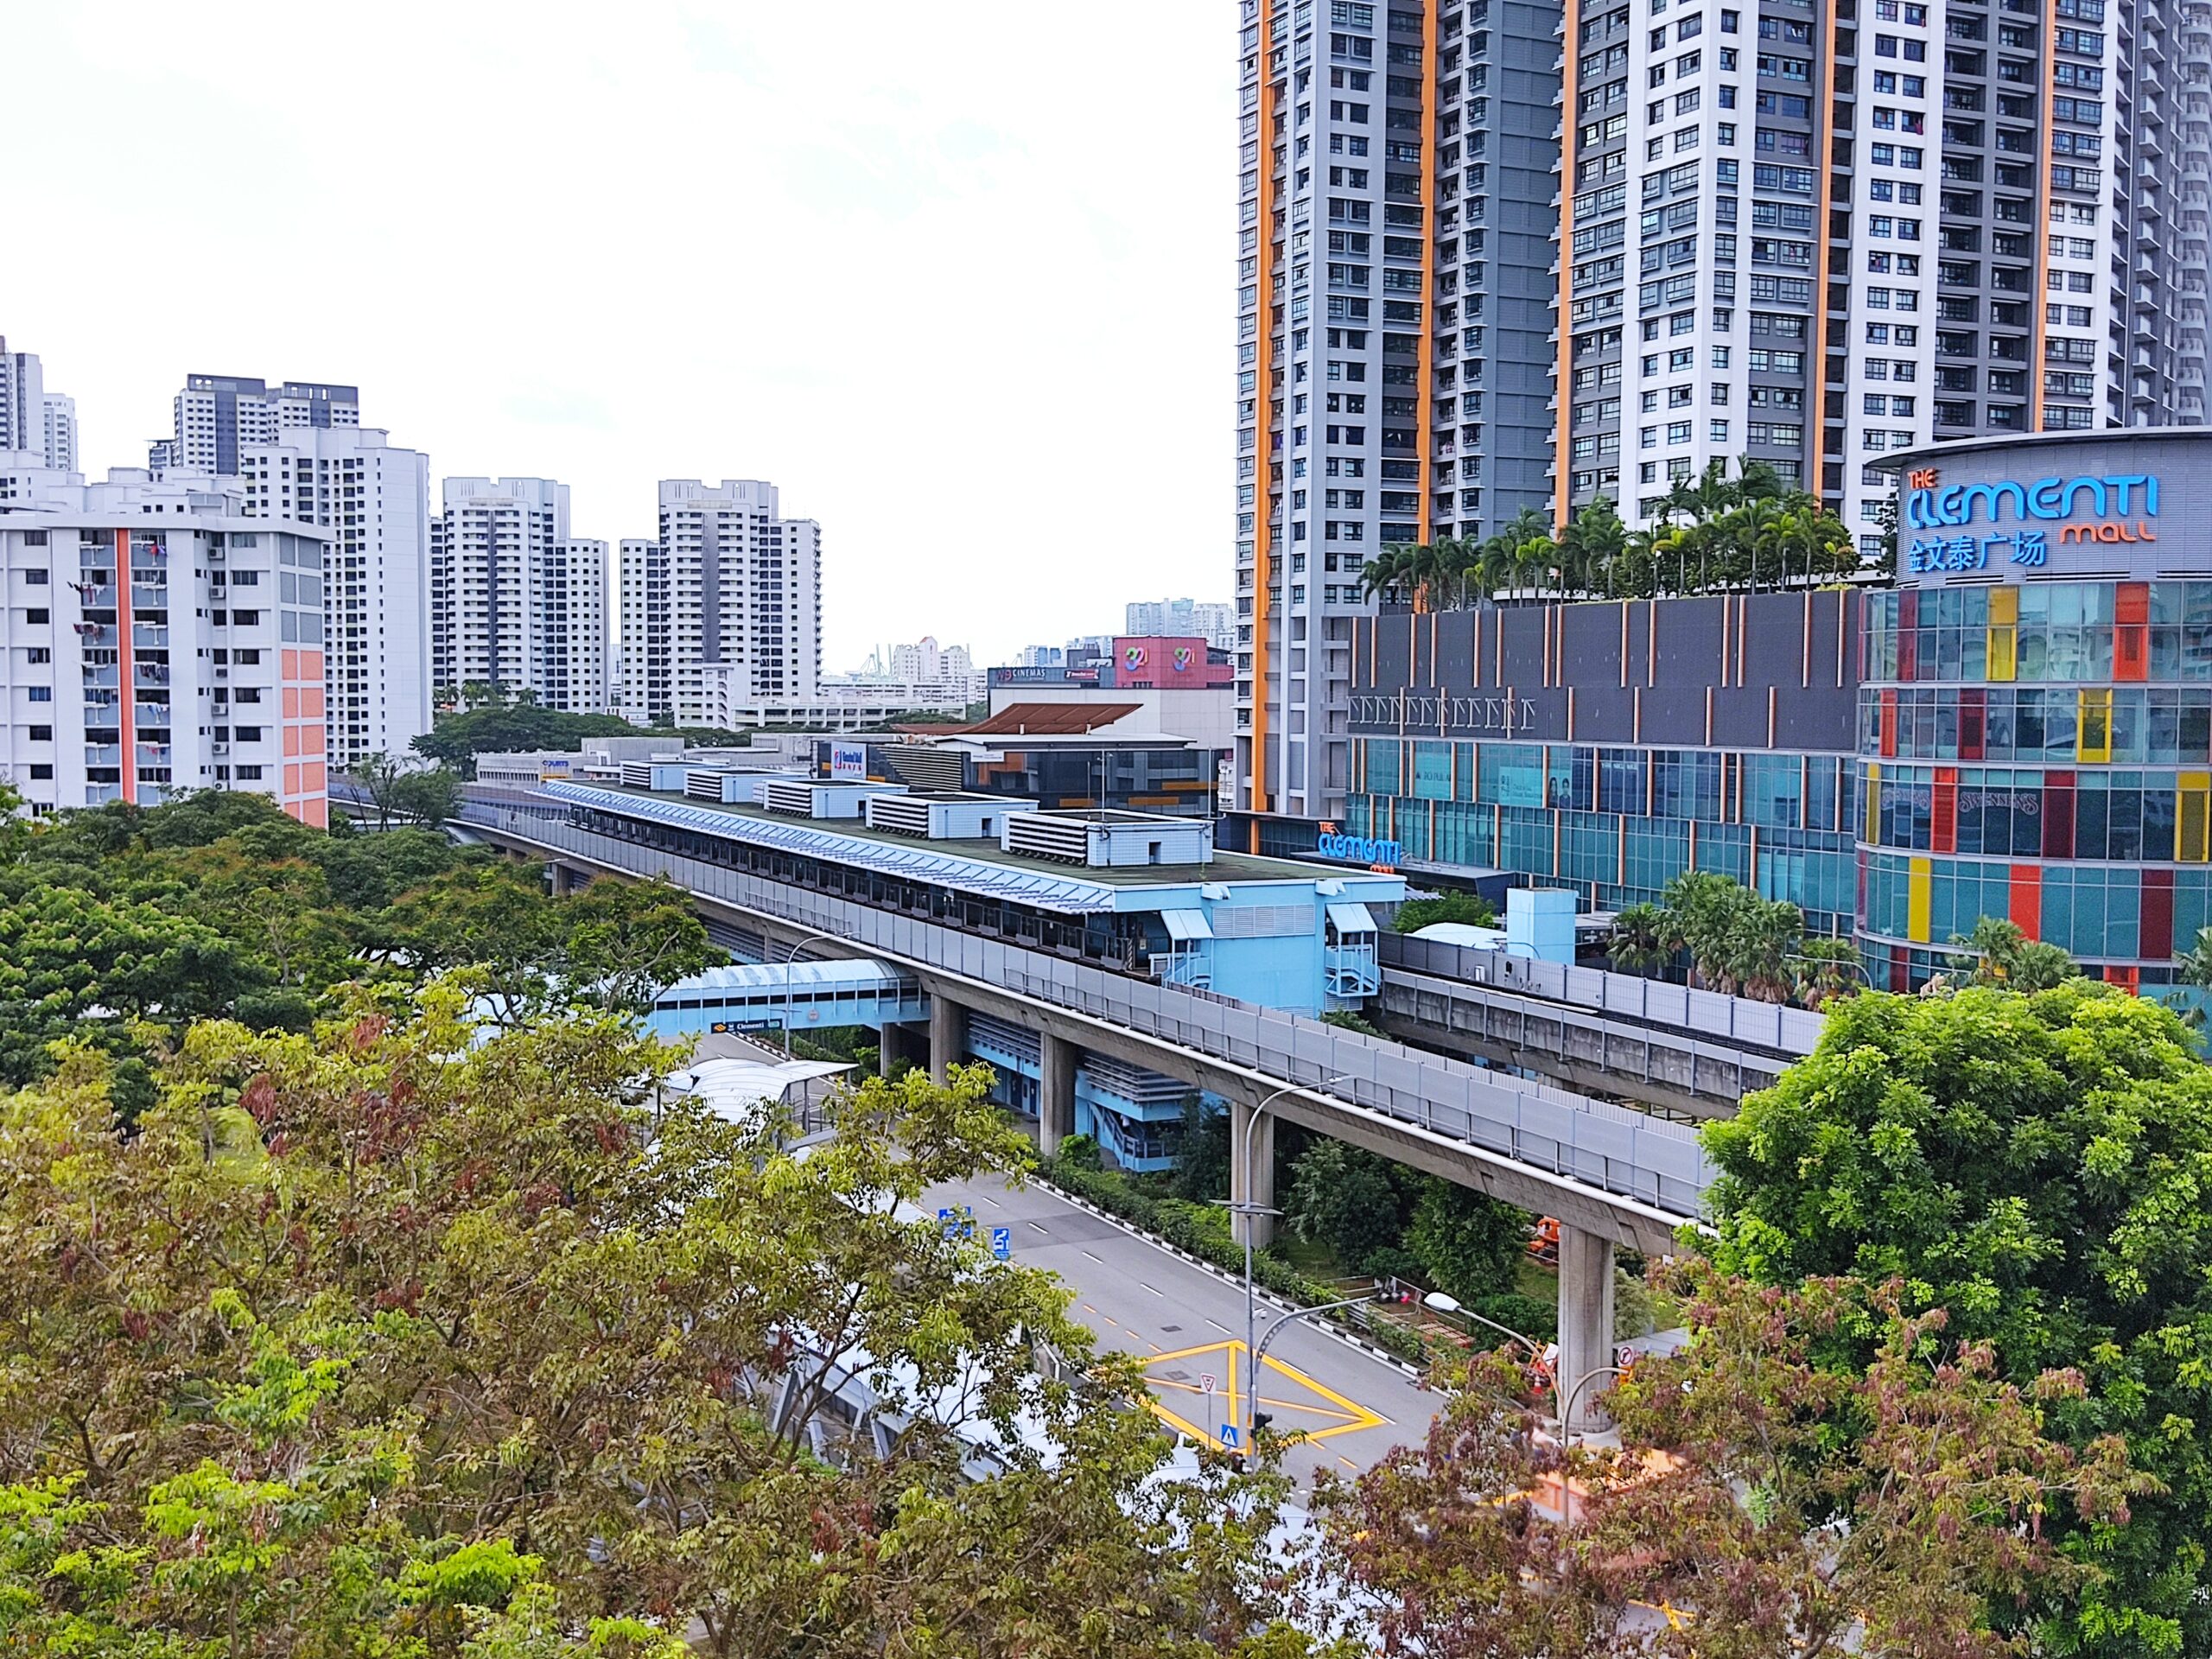 A long shot of the Clementi area, filled with greenery, apartments and Clementi Mall